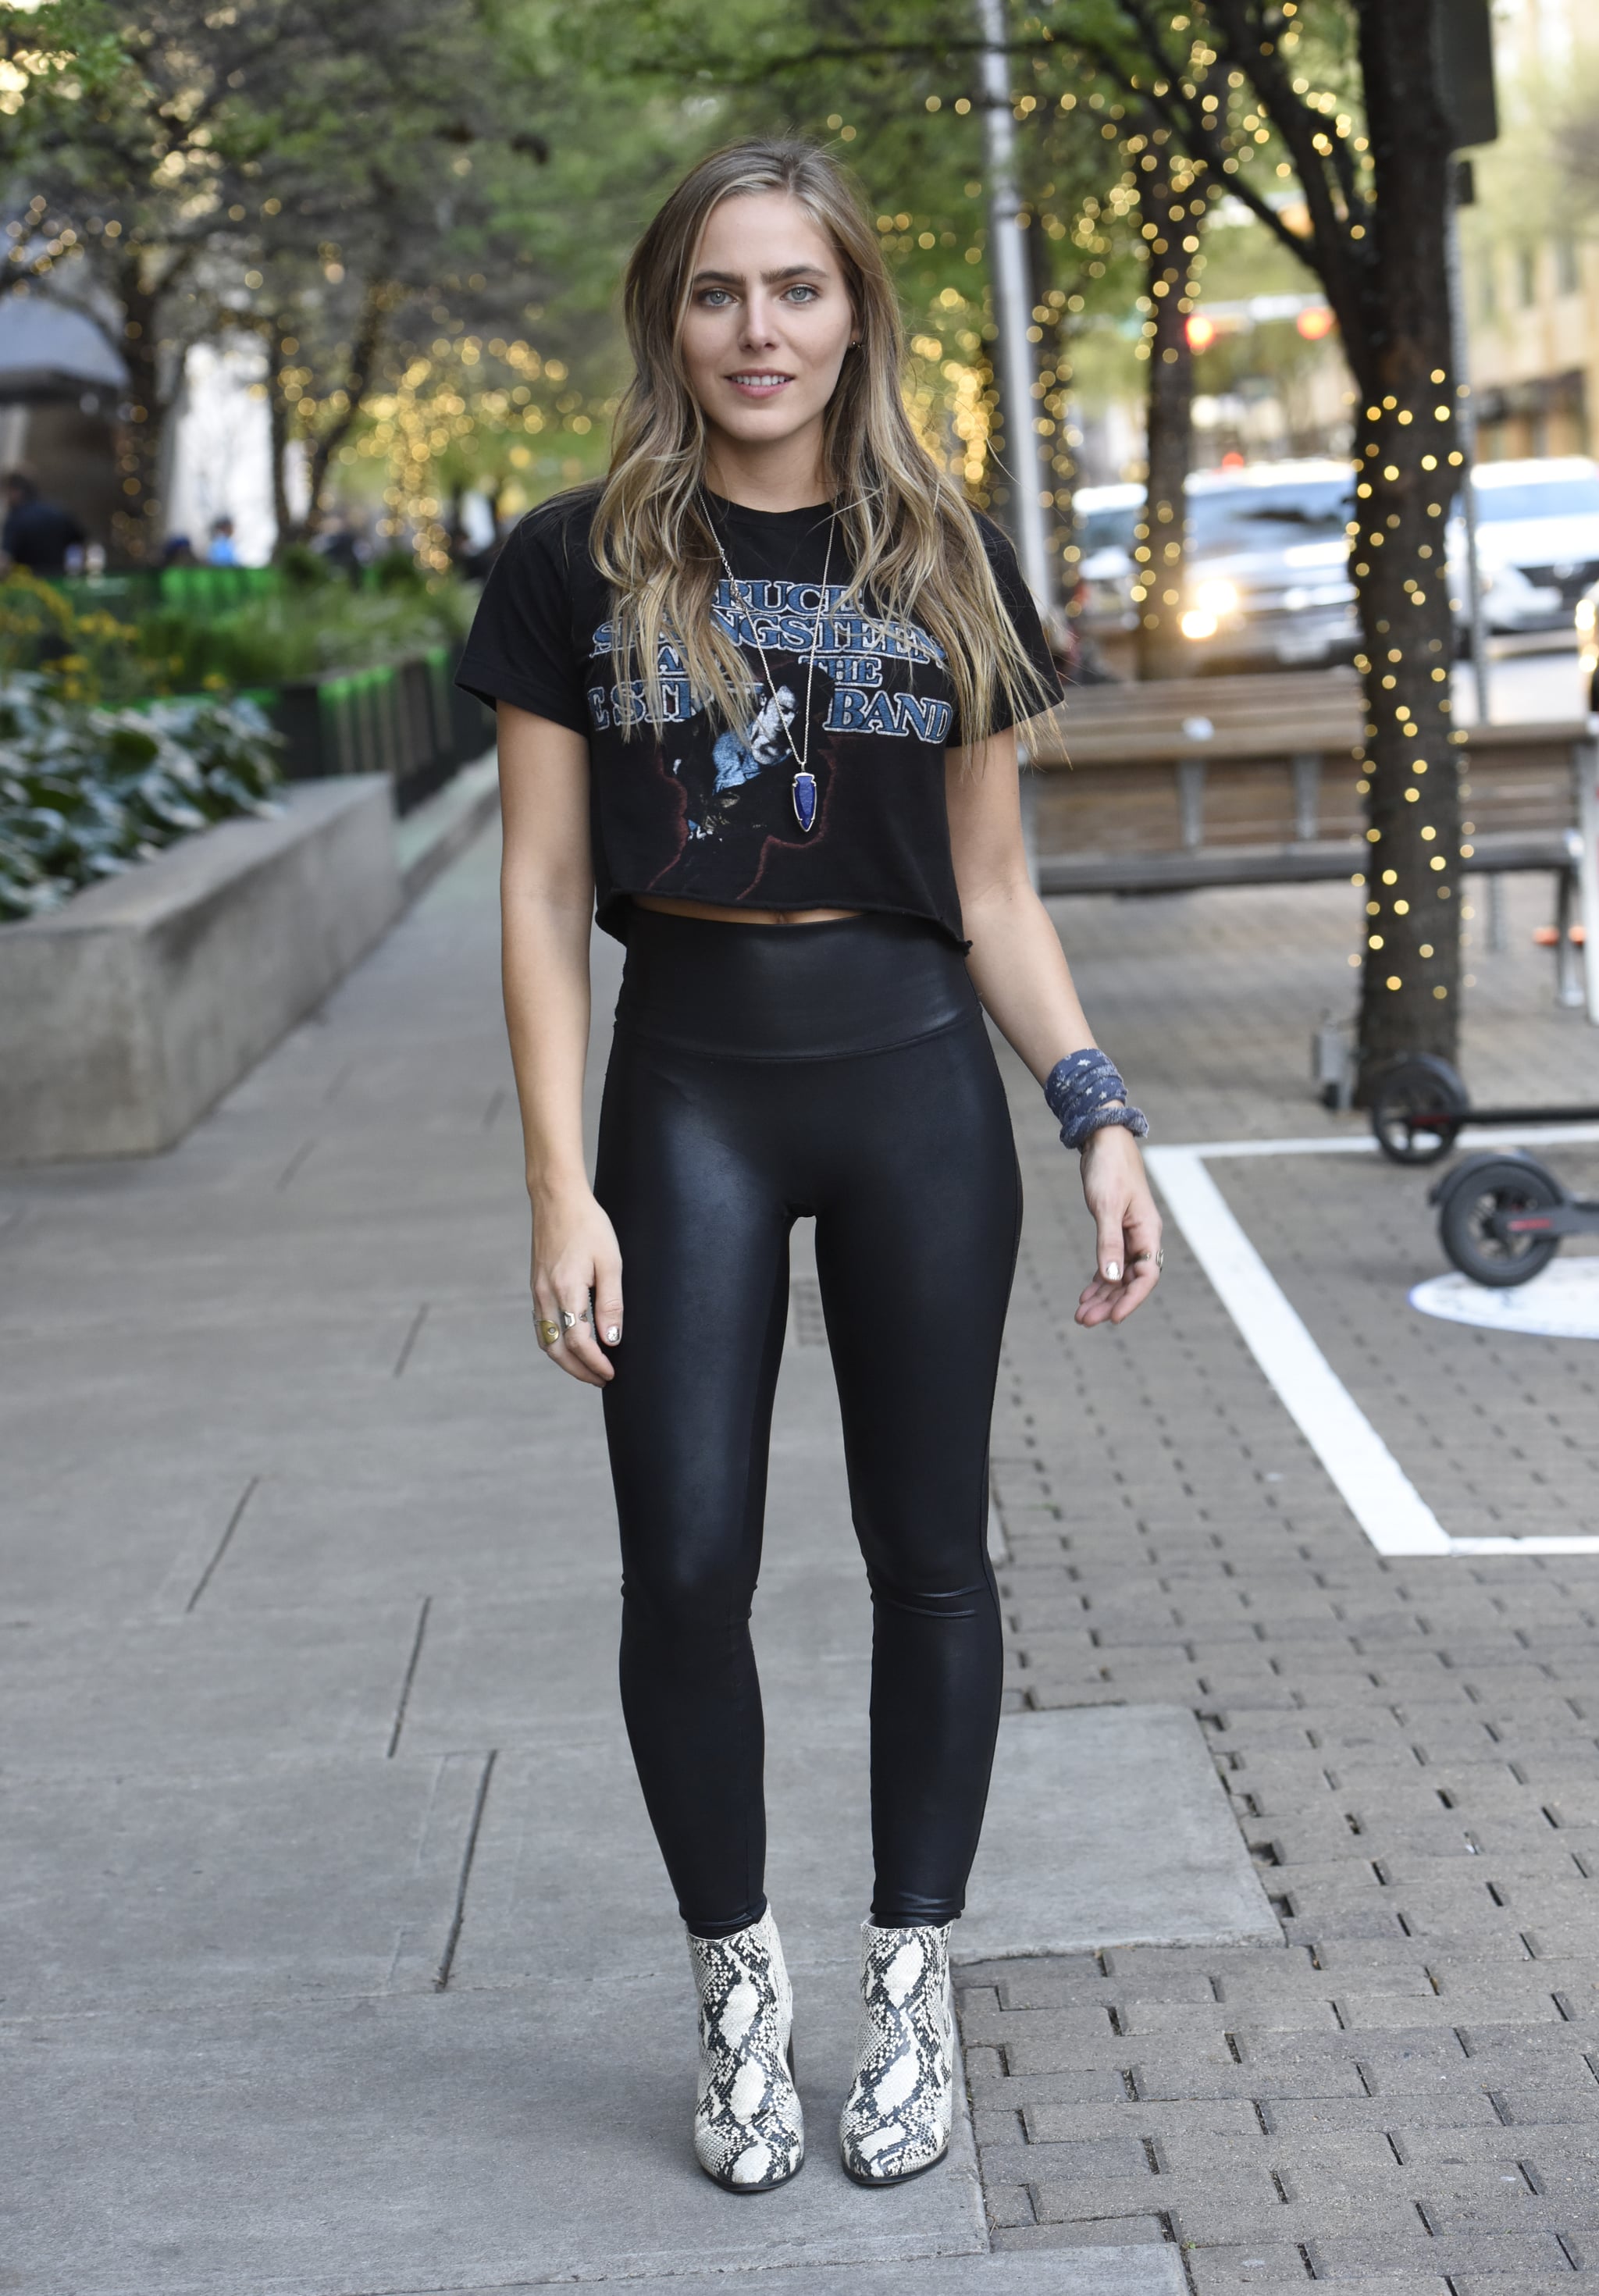 27 Looks That Will Convince You to Wear Leggings Outside the Gym